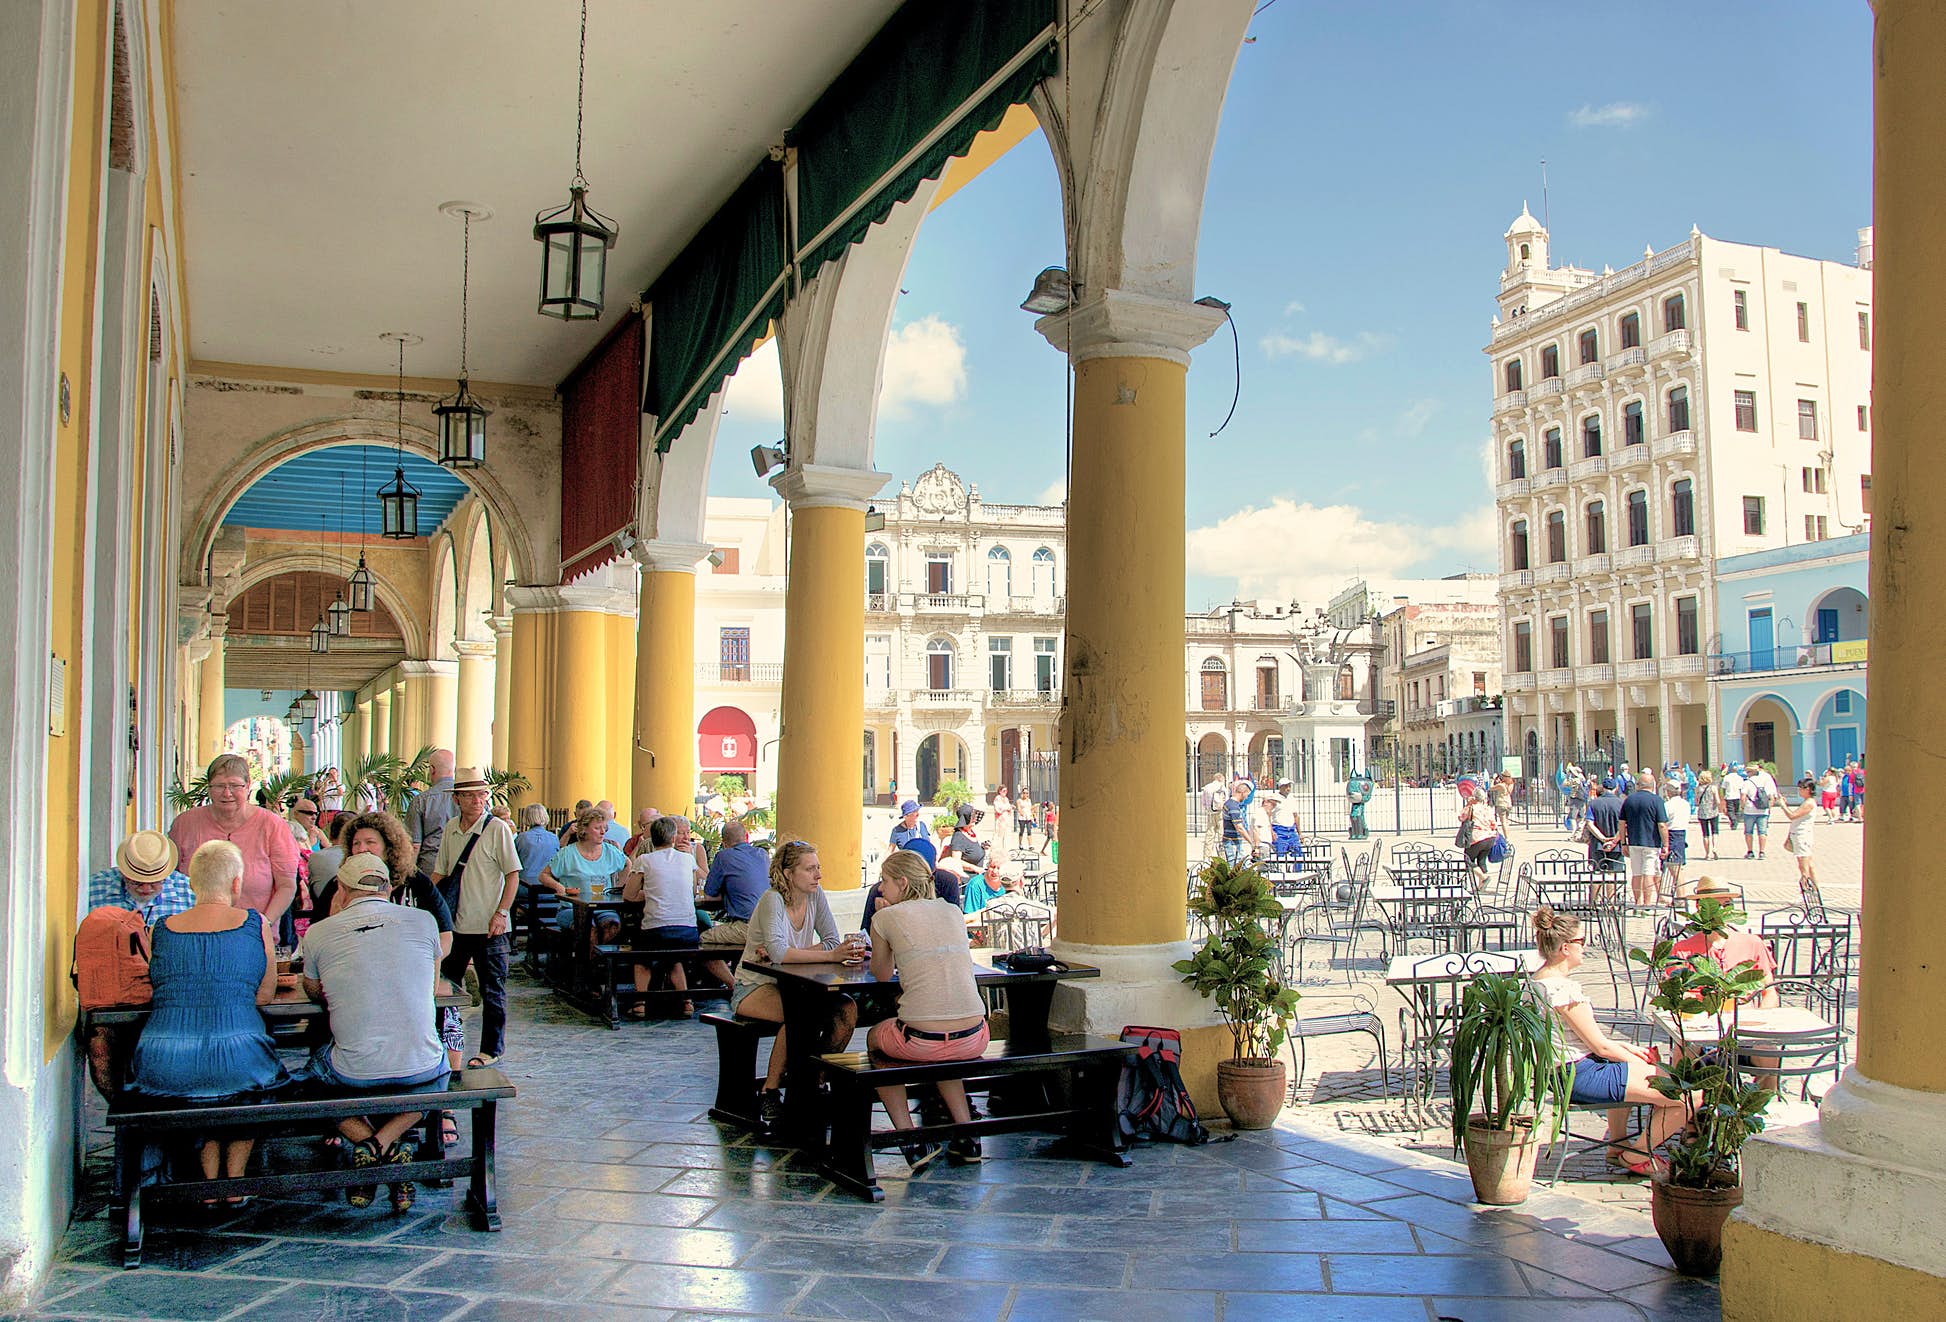 Visitors sitting at a cafe in Plaza Vieja (Old Square): tourism is the mainstay of the Cuban economy © Alarax/Shutterstock